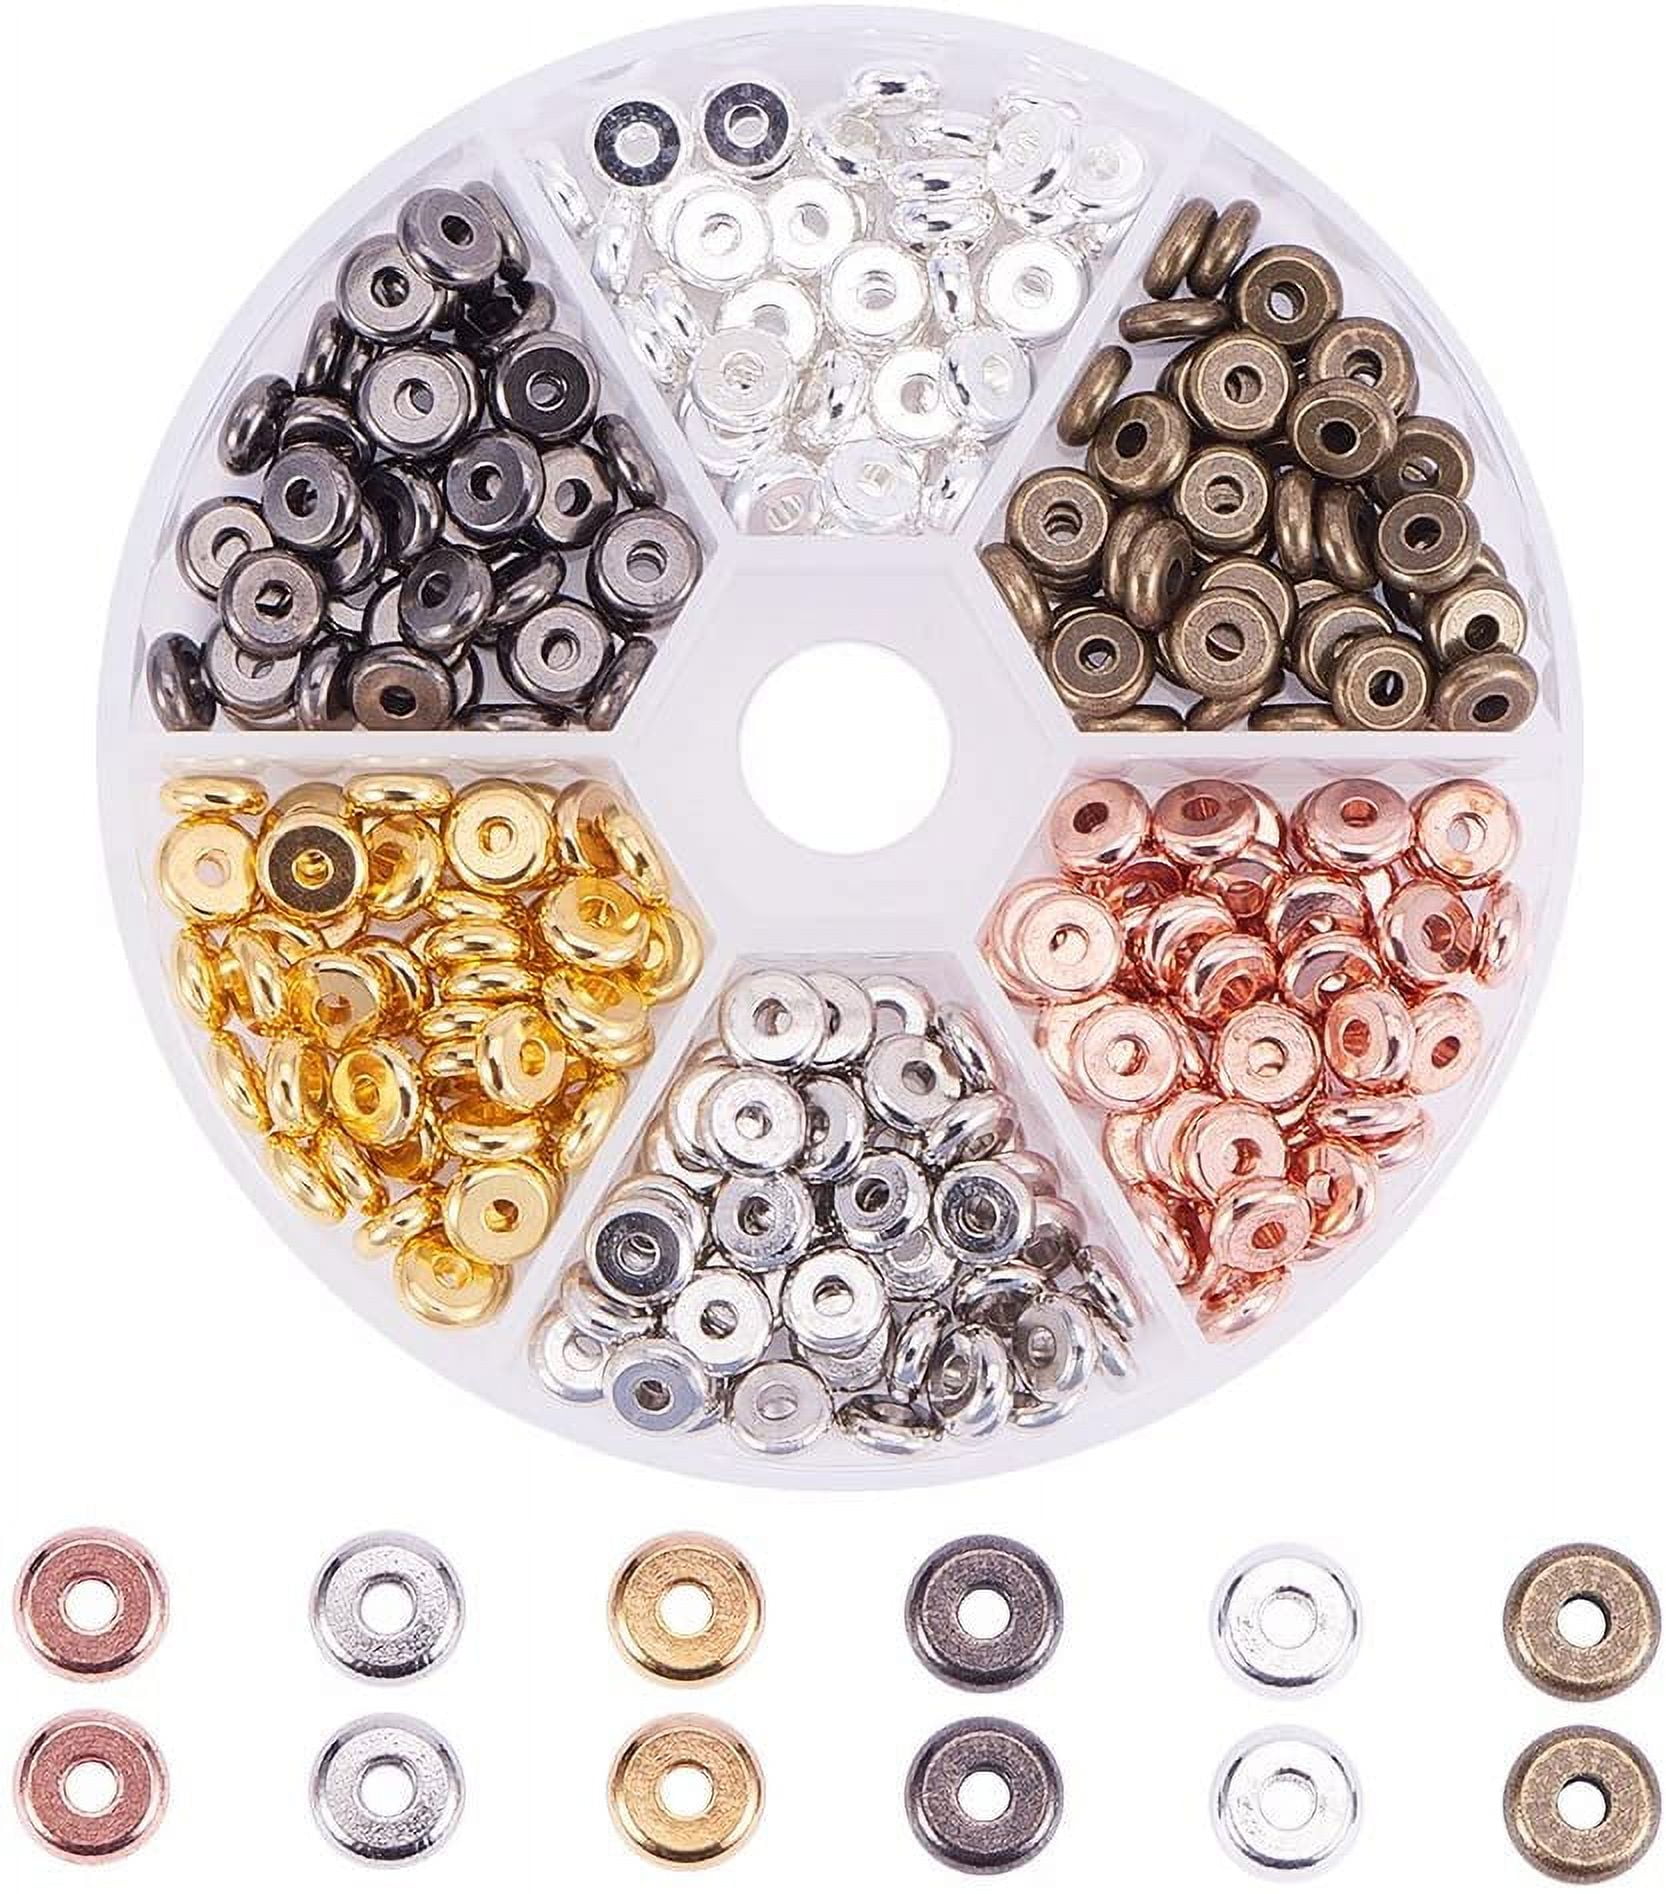 Alloy Spacer Beads, 200 Pieces 7mm Metal Bead Spacers Wheel Gear Bracelet  Spacers Craft Beads Findings for Bracelet Necklace Jewelry Making - Silver